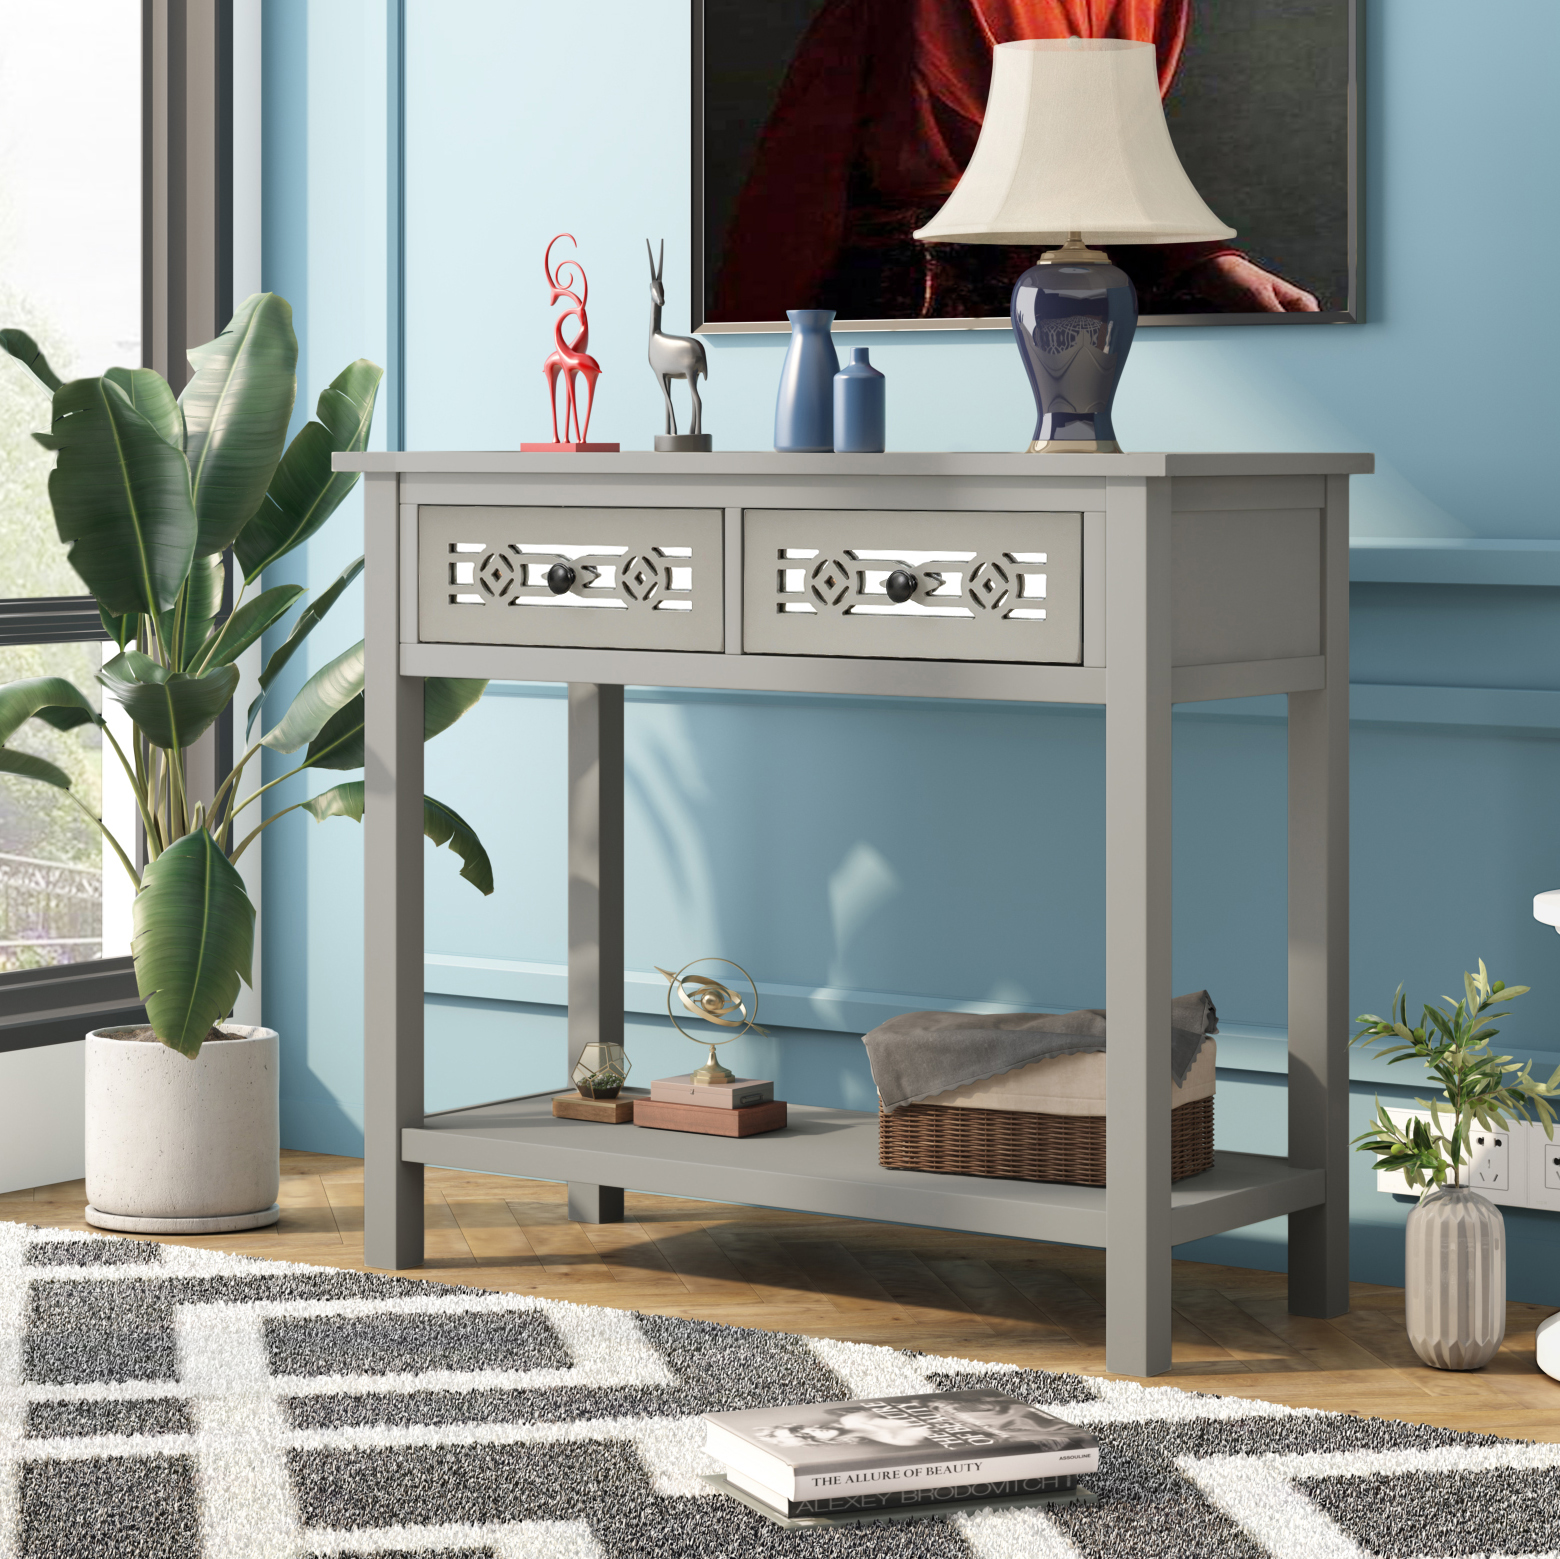 Classic Console Table With Two Drawers And Open Shelf - WF199310AAN